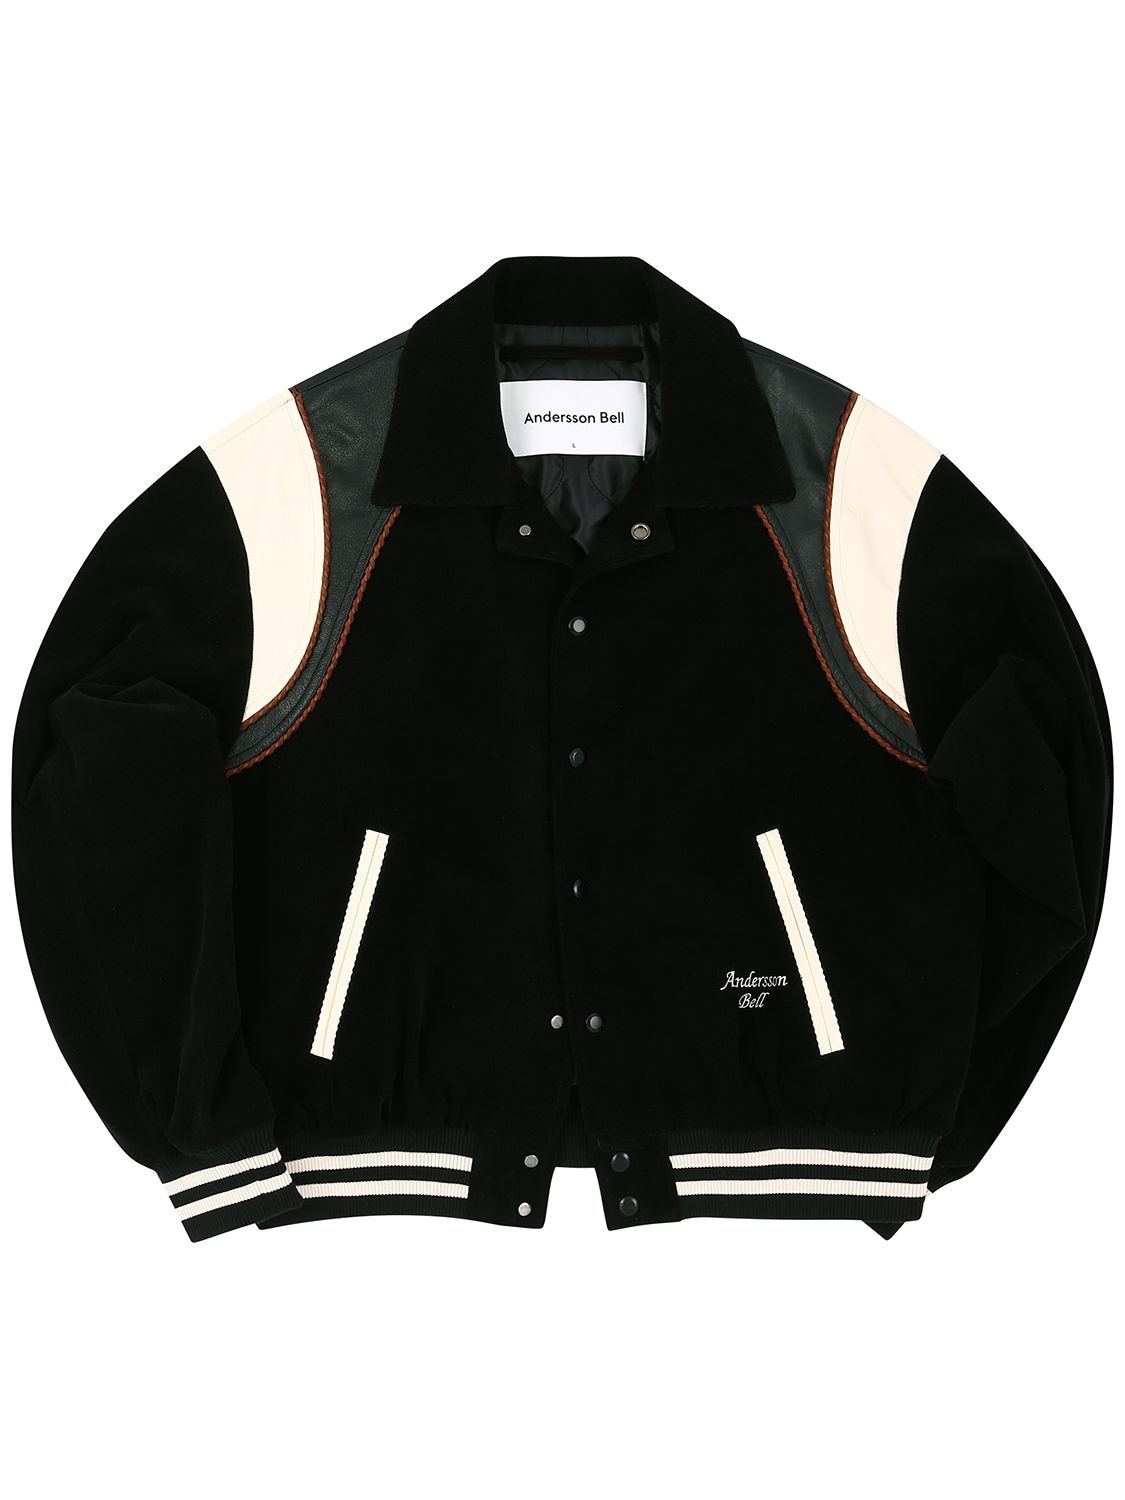 Andersson Bell Motorcycle Leather Varsity Jacket